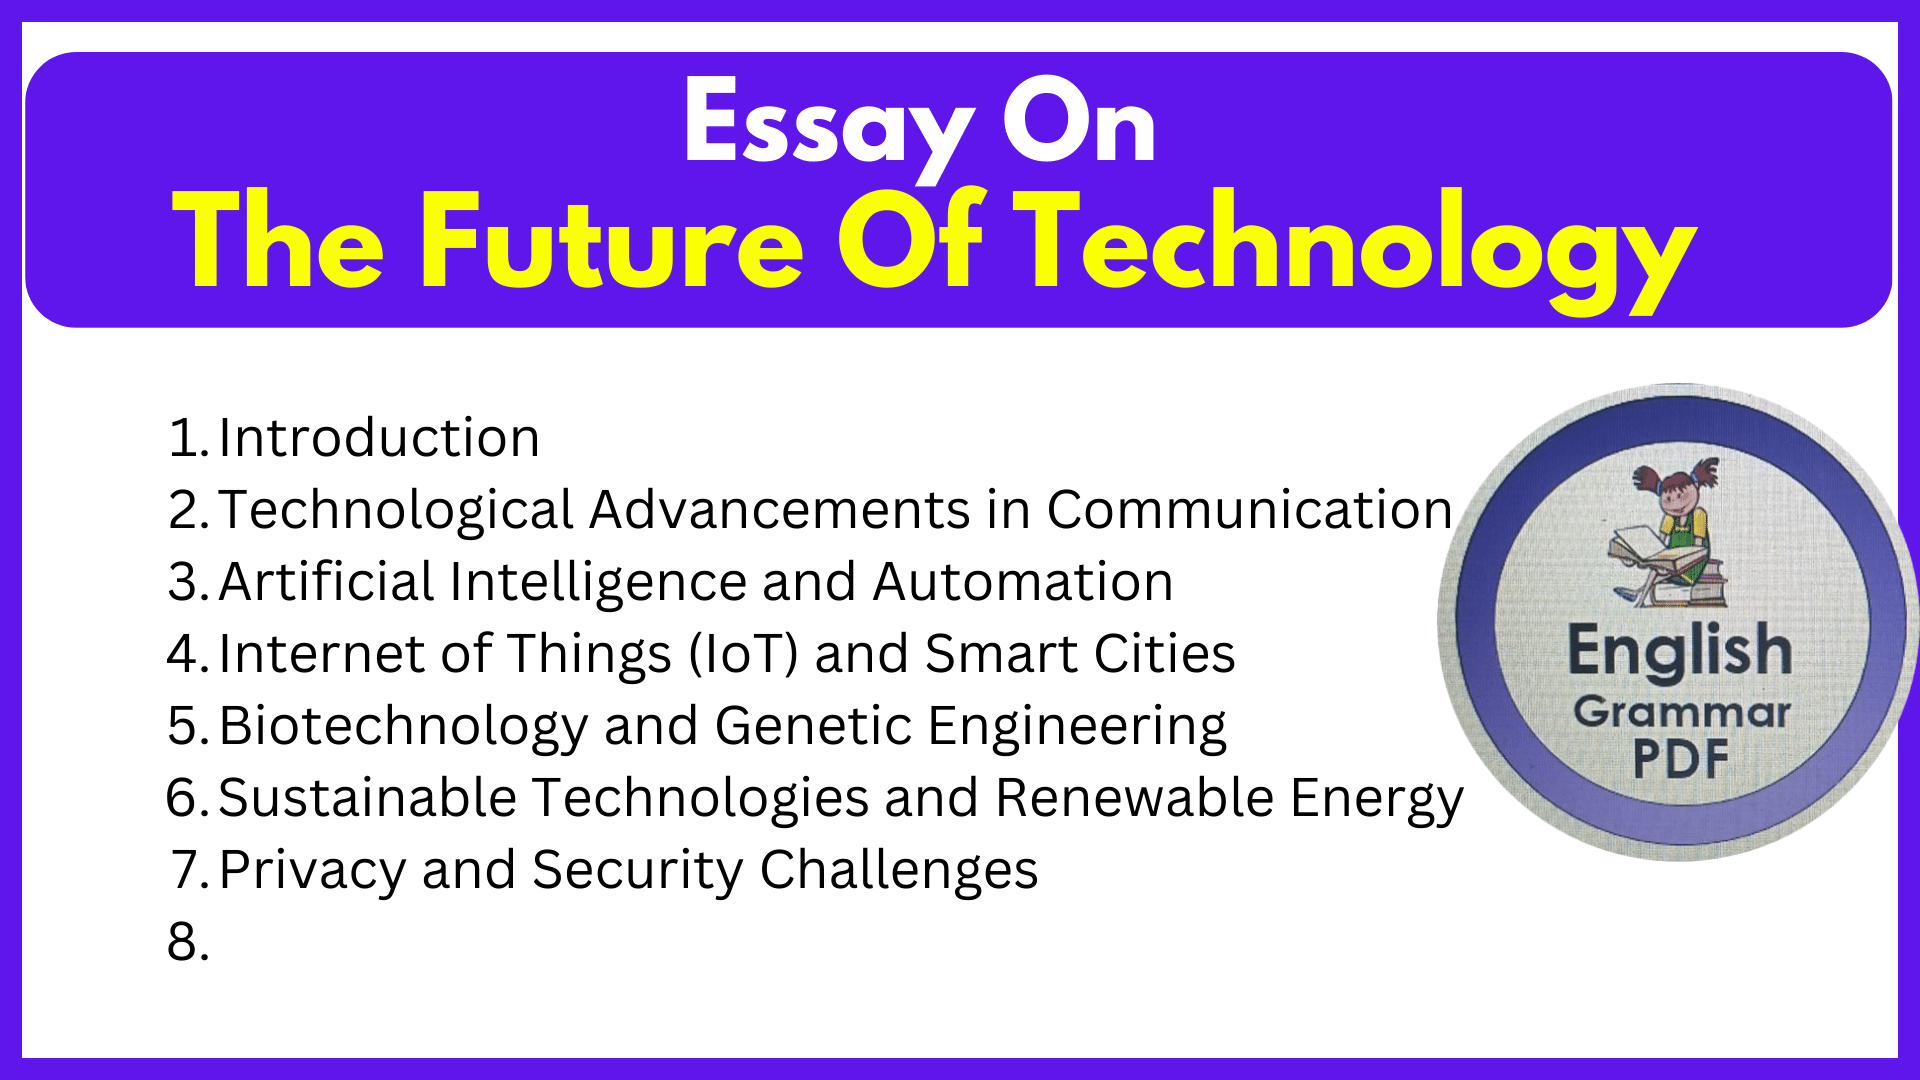 Essay On The Future Of Technology